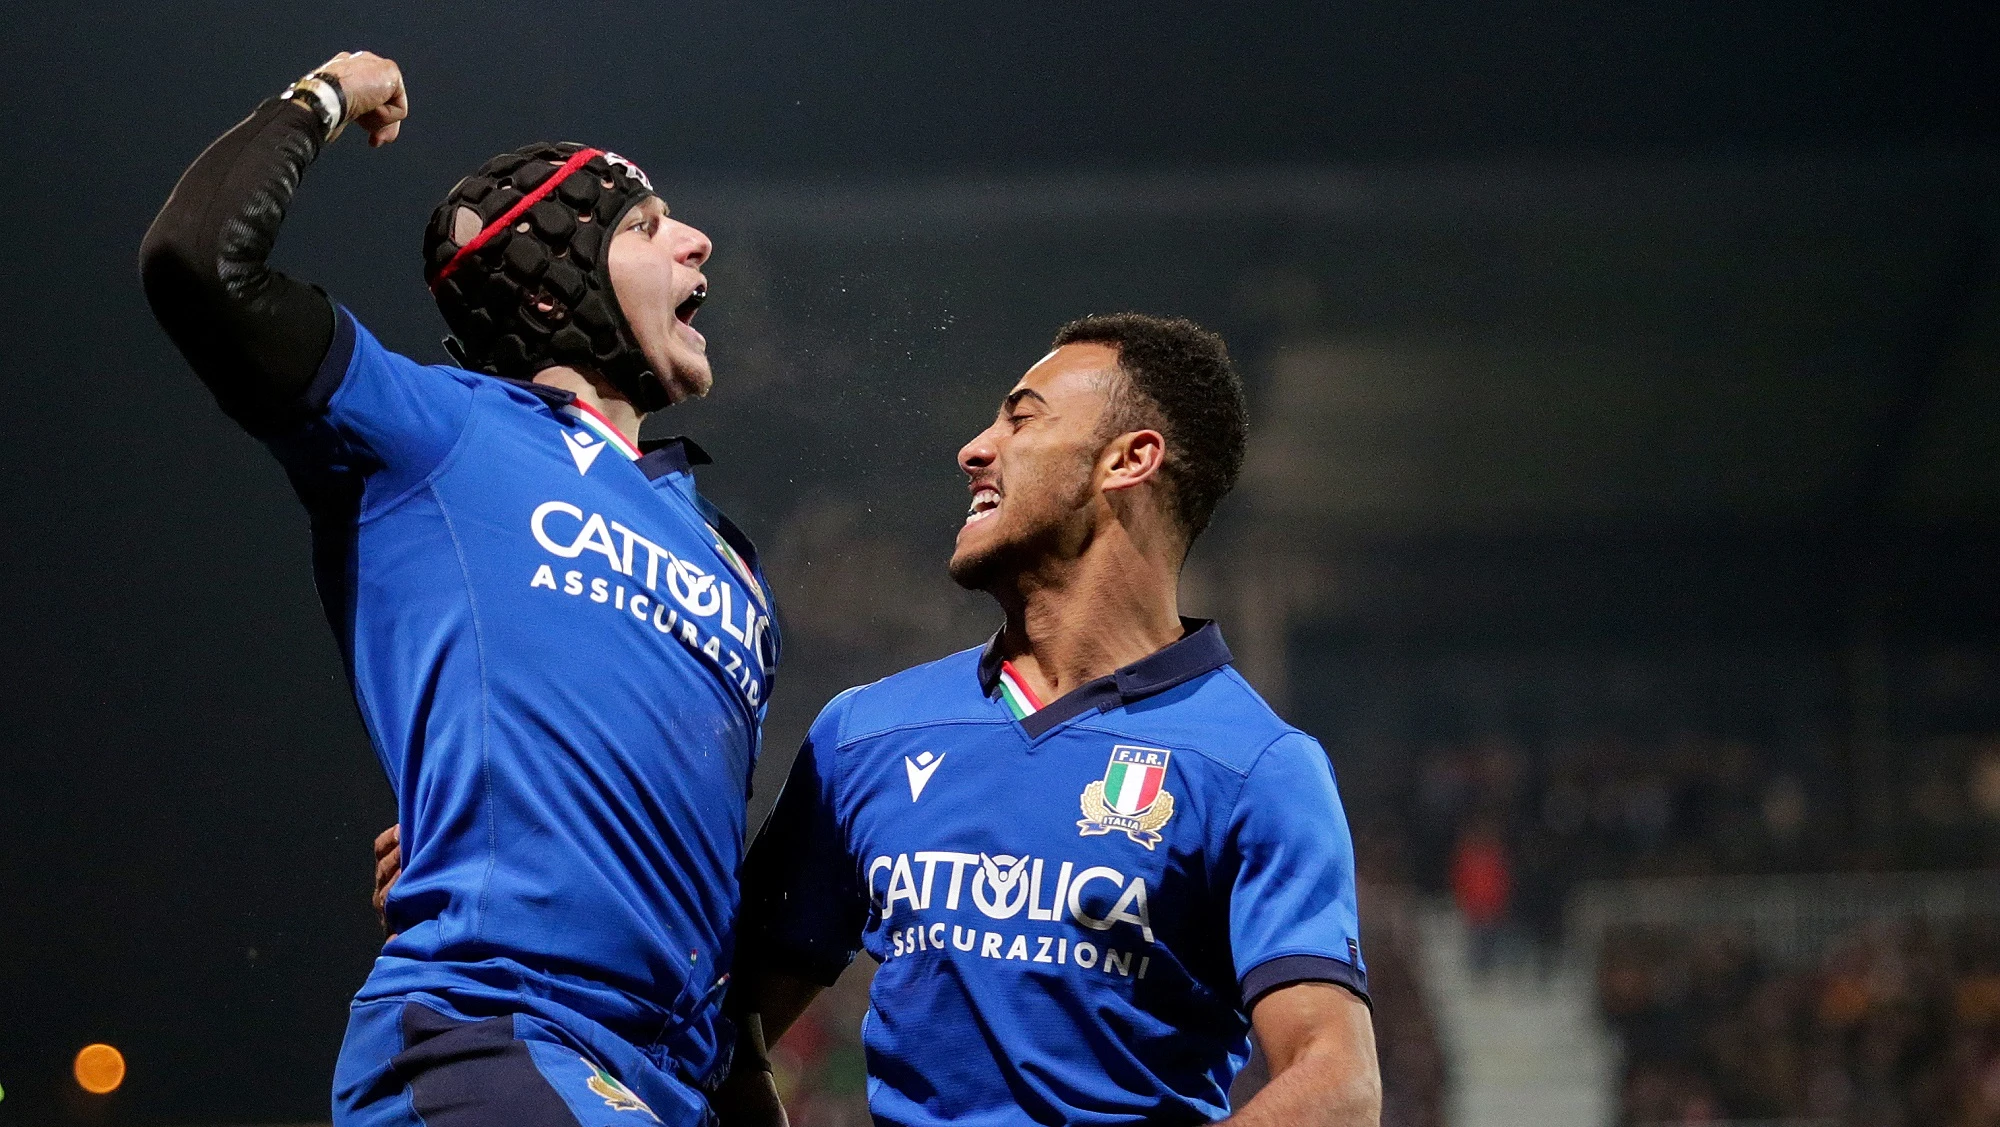 Cristian Lai celebrates scoring a try with Michel Mba 7/2/2020